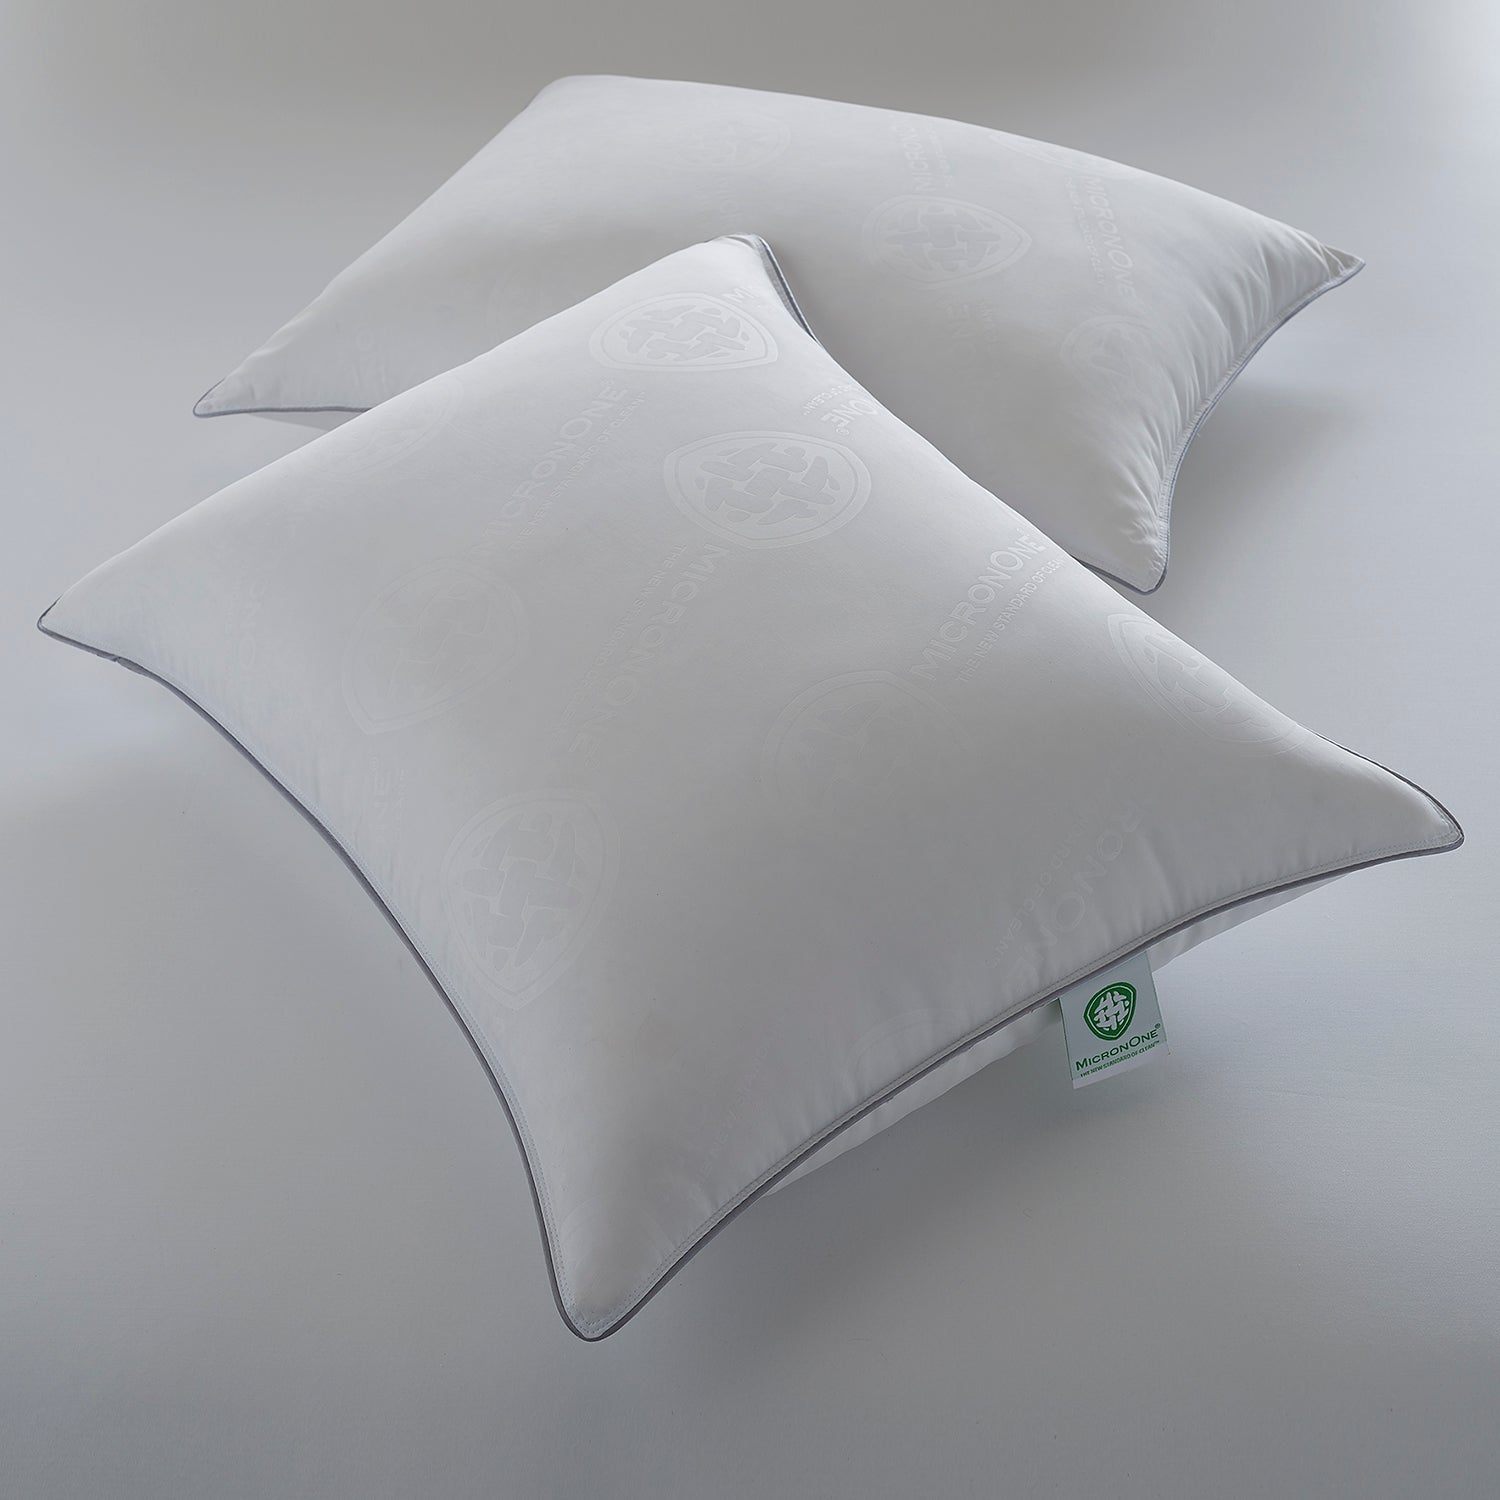 Allergy, Dust Mite & Bed Bug Free Medium Density Pillow with MicronOne Technology - Set of Two